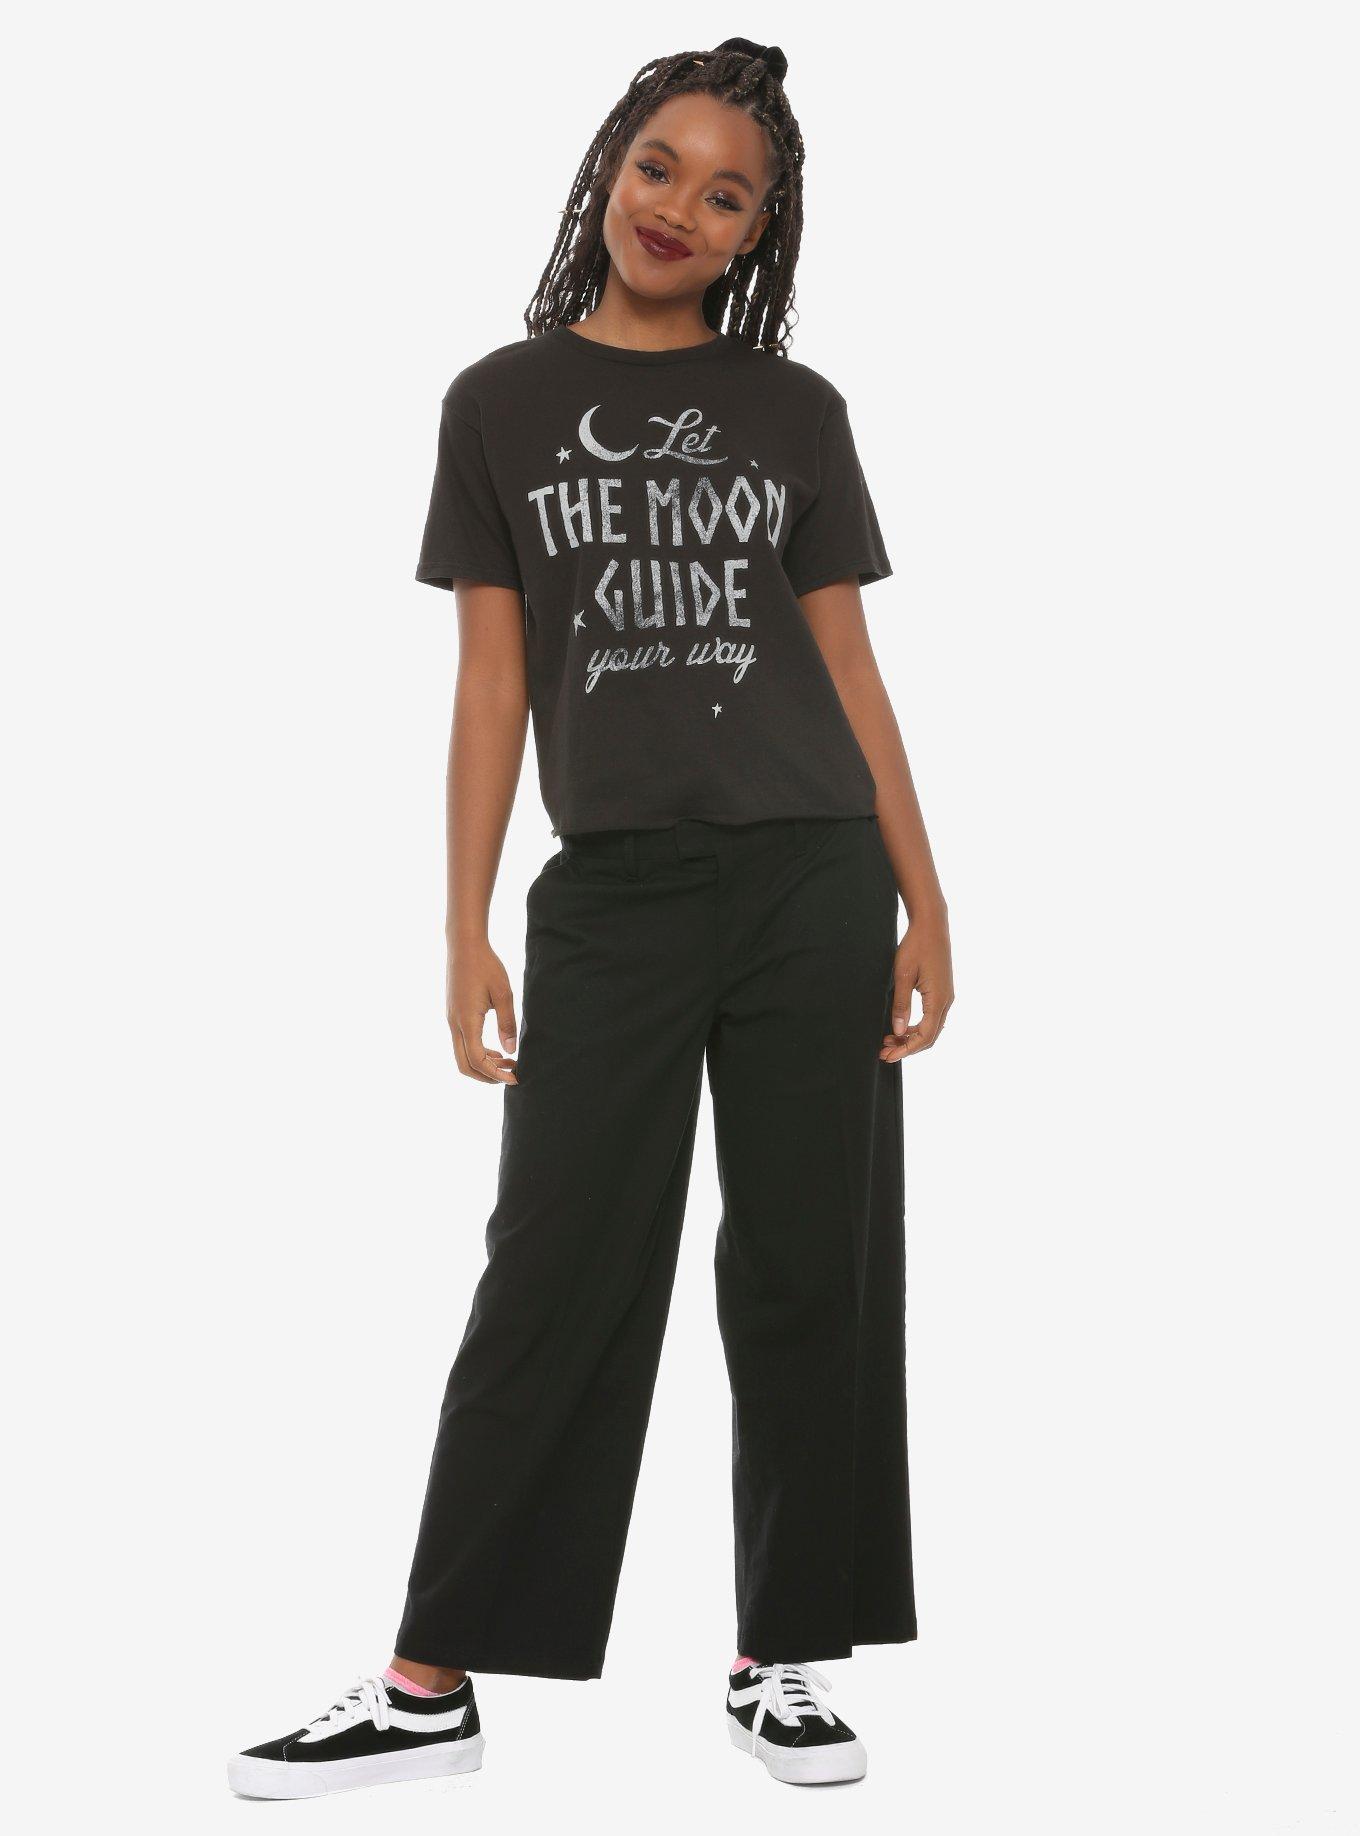 Let The Moon Guide Your Way Girls Crop T-Shirt, BLACK, alternate